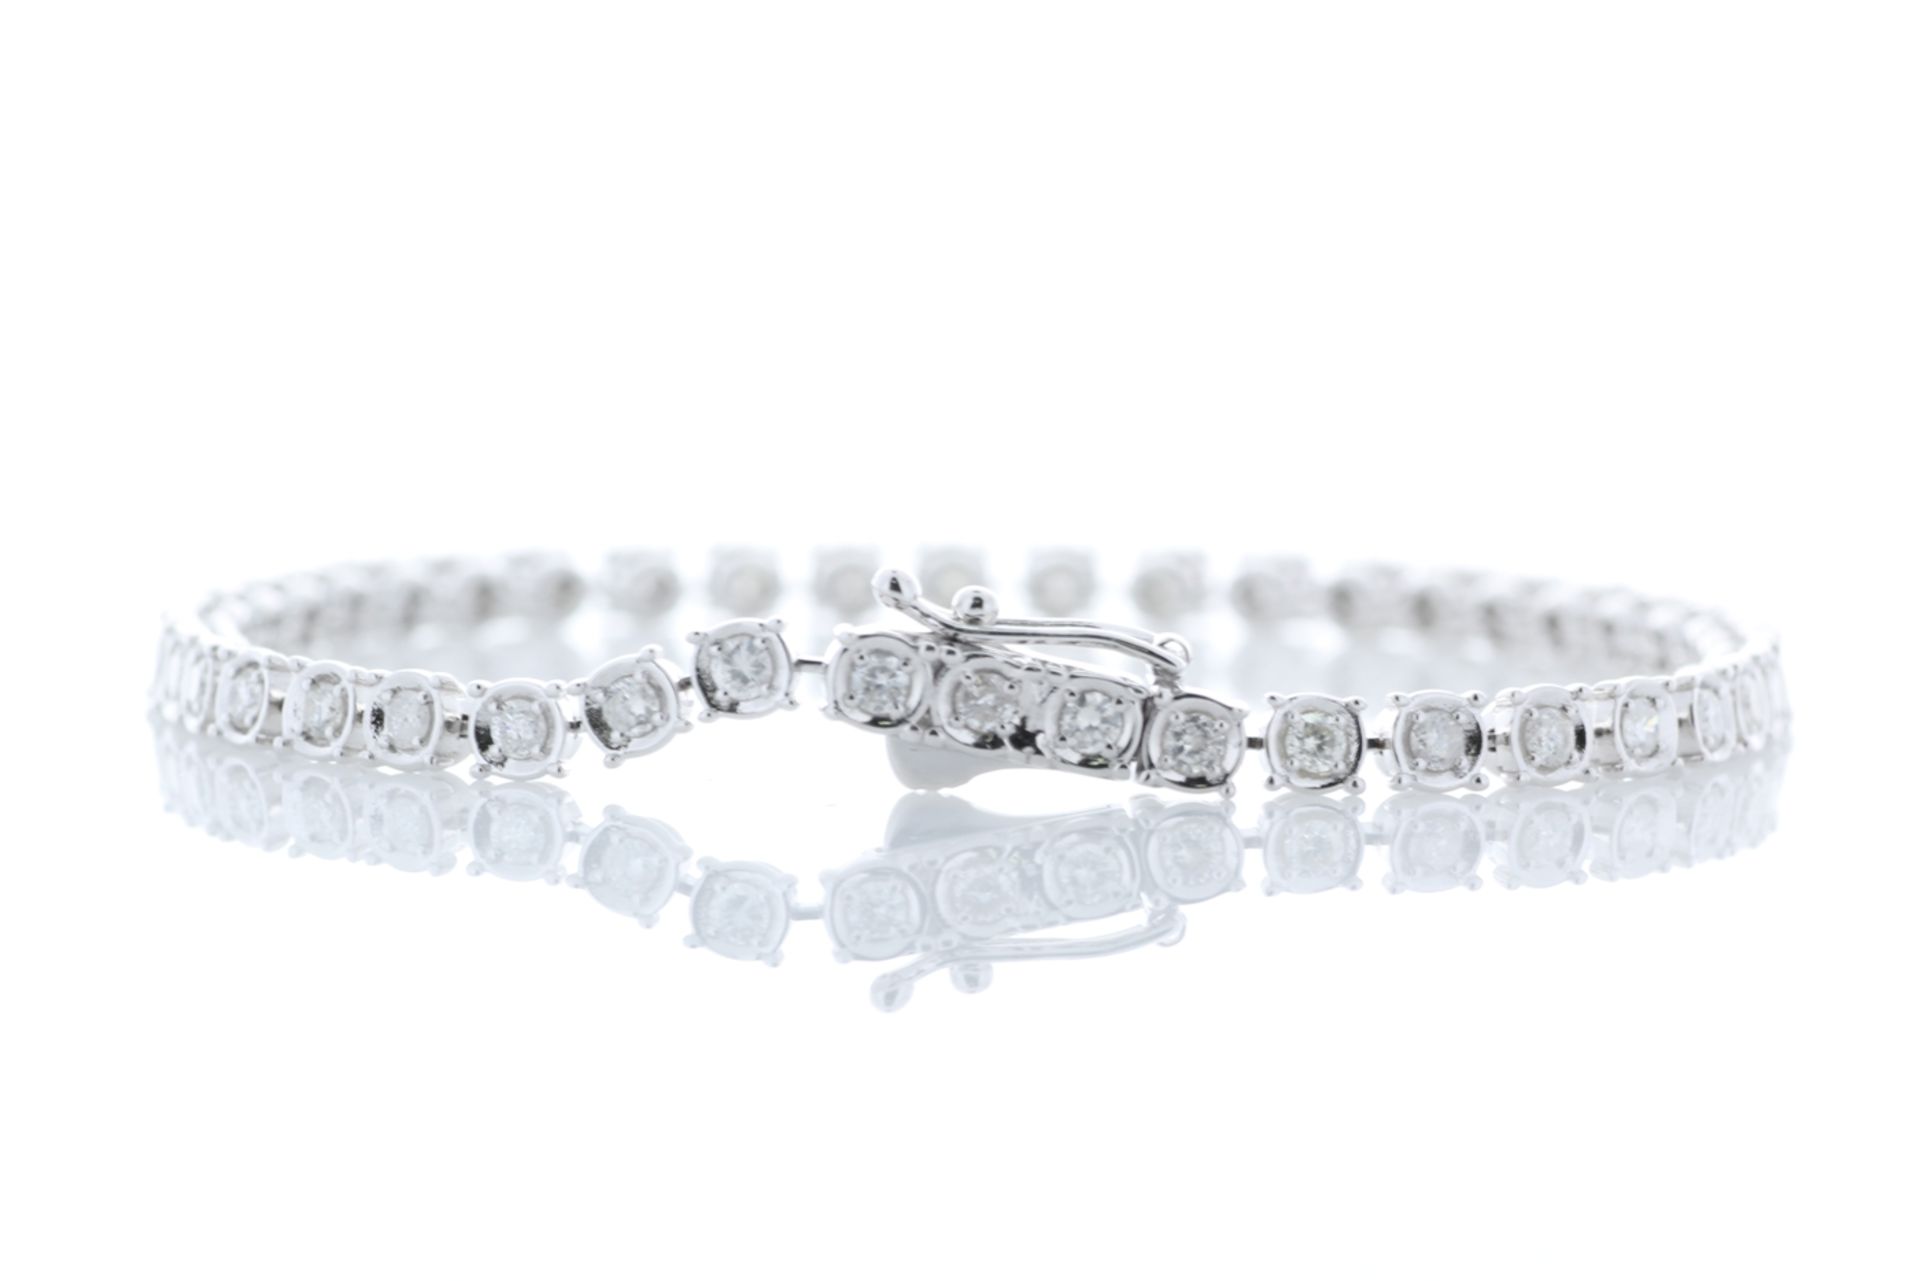 18ct White Gold Tennis Diamond Bracelet 1.50 Carats - Valued by GIE £19,220.00 - 18ct White Gold - Image 3 of 5